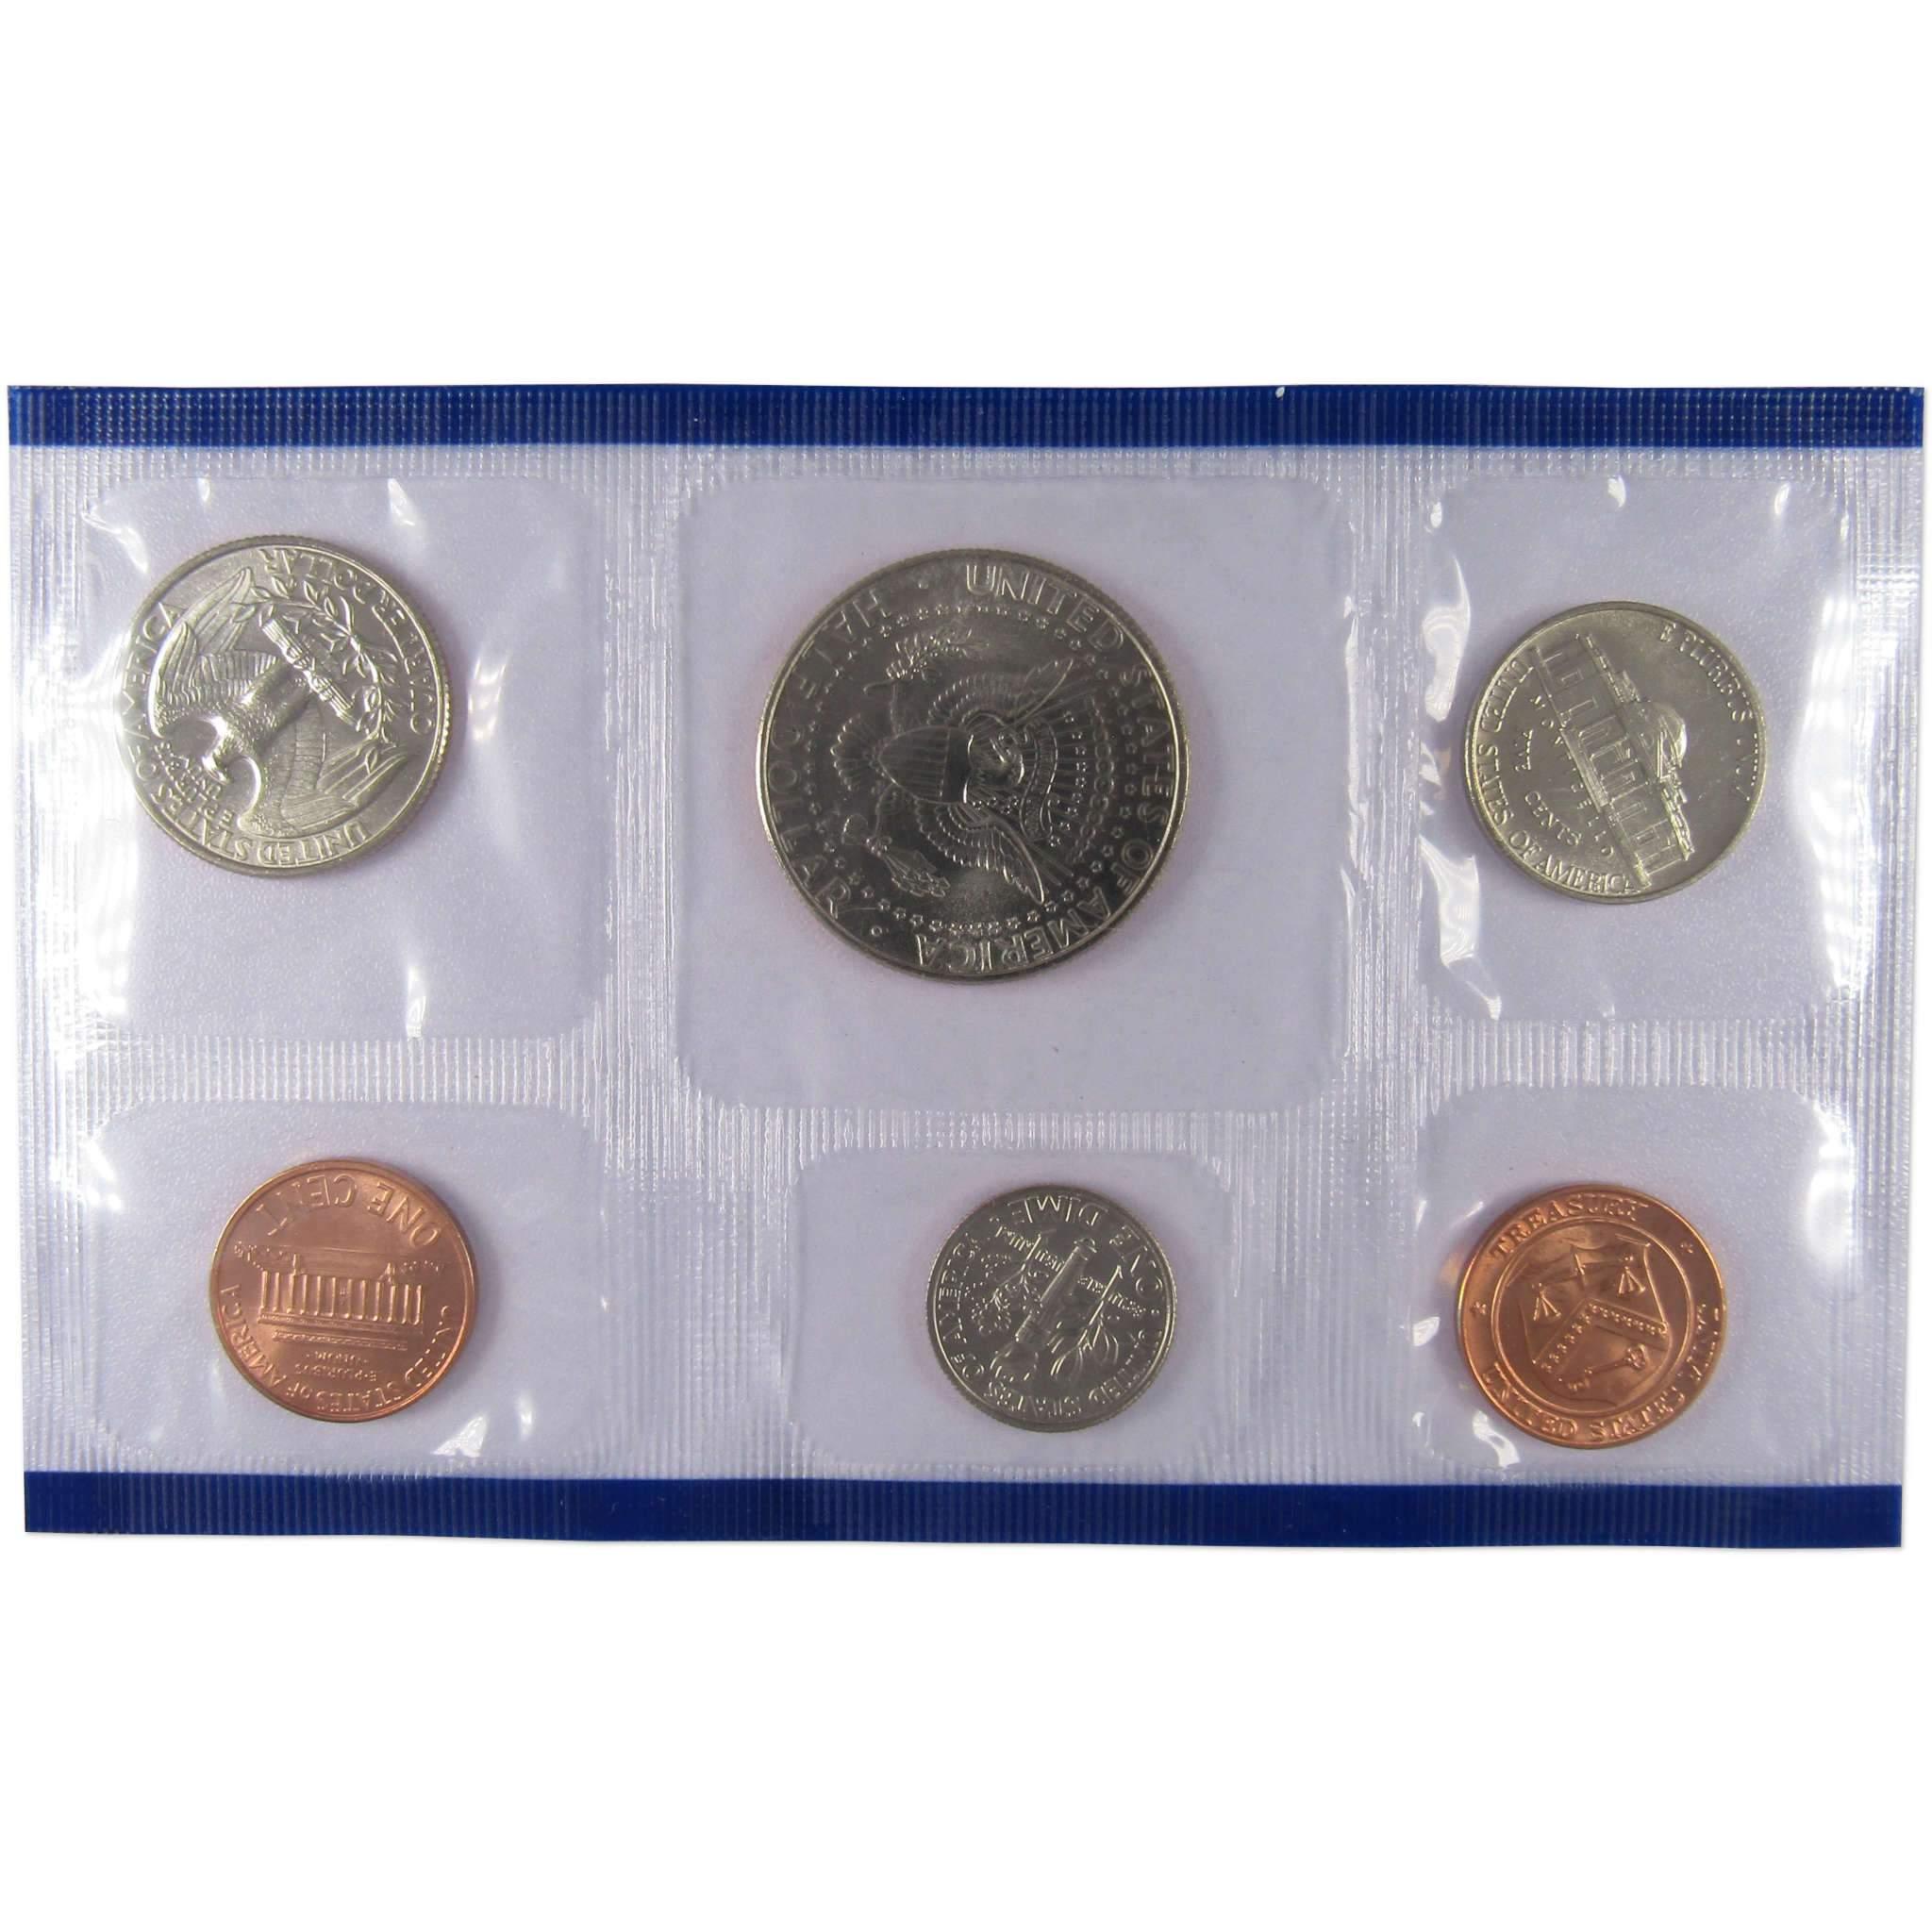 1997 U.S. Mint Set Uncirculated Original Government Packaging OGP Collectible